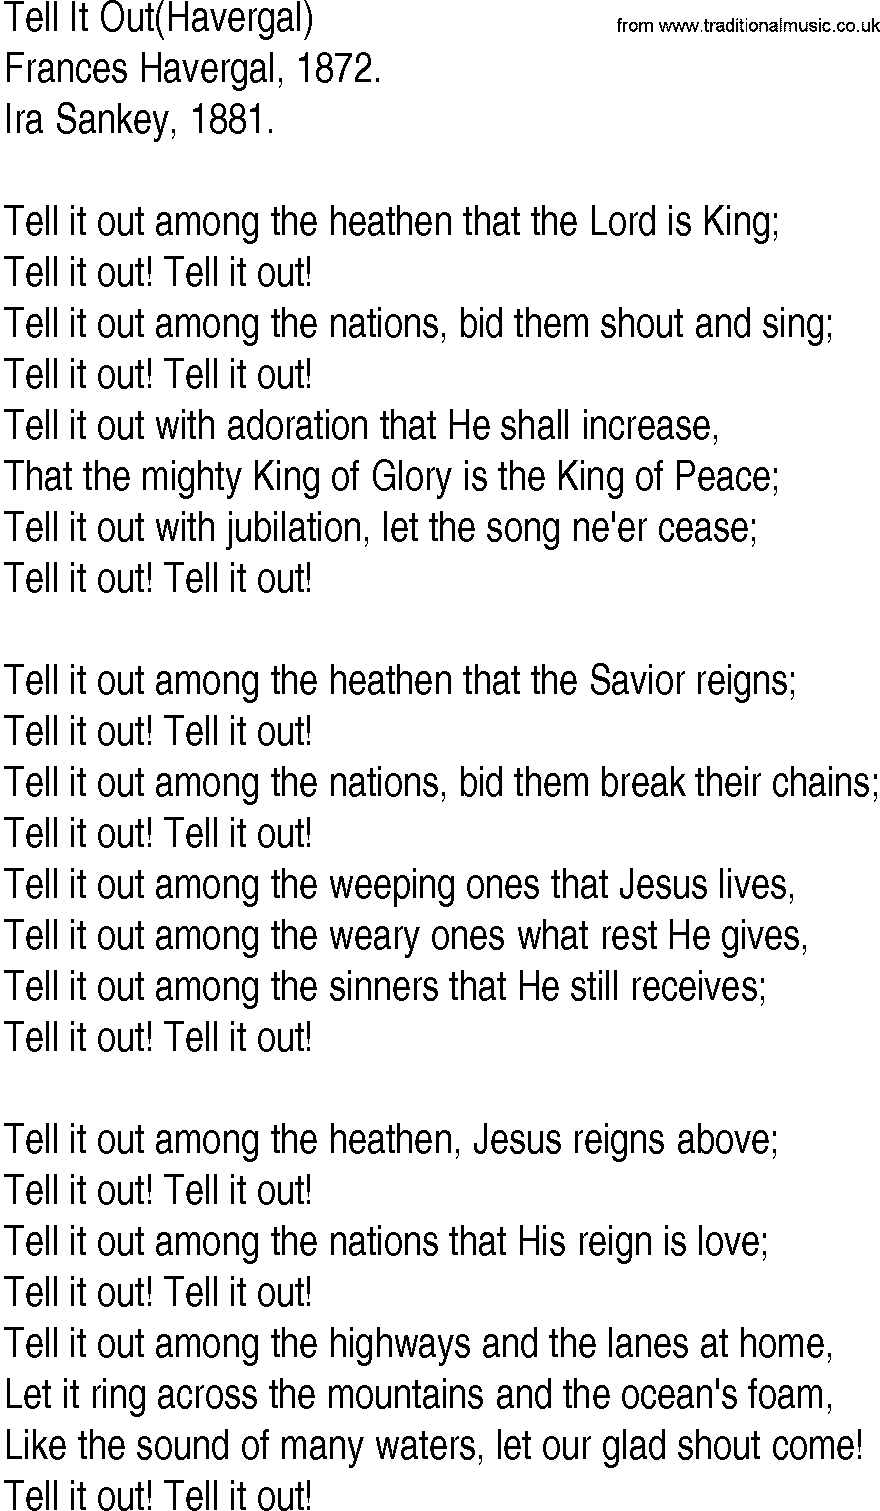 Hymn and Gospel Song: Tell It Out(Havergal) by Frances Havergal lyrics